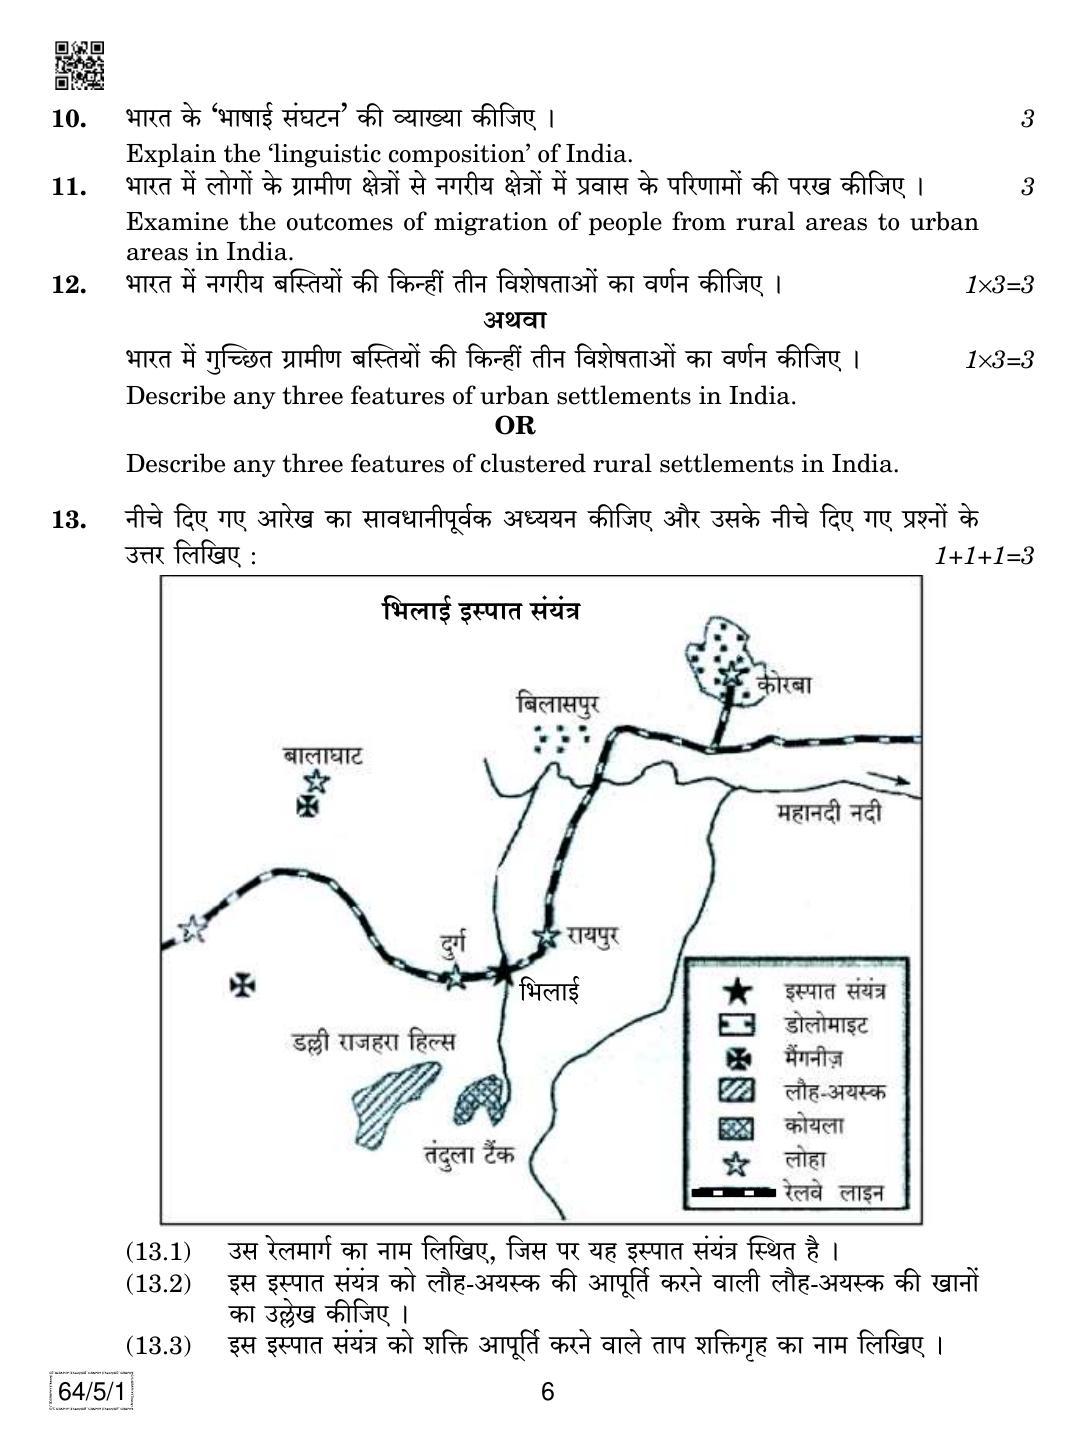 CBSE Class 12 64-5-1 Geography 2019 Question Paper - Page 6